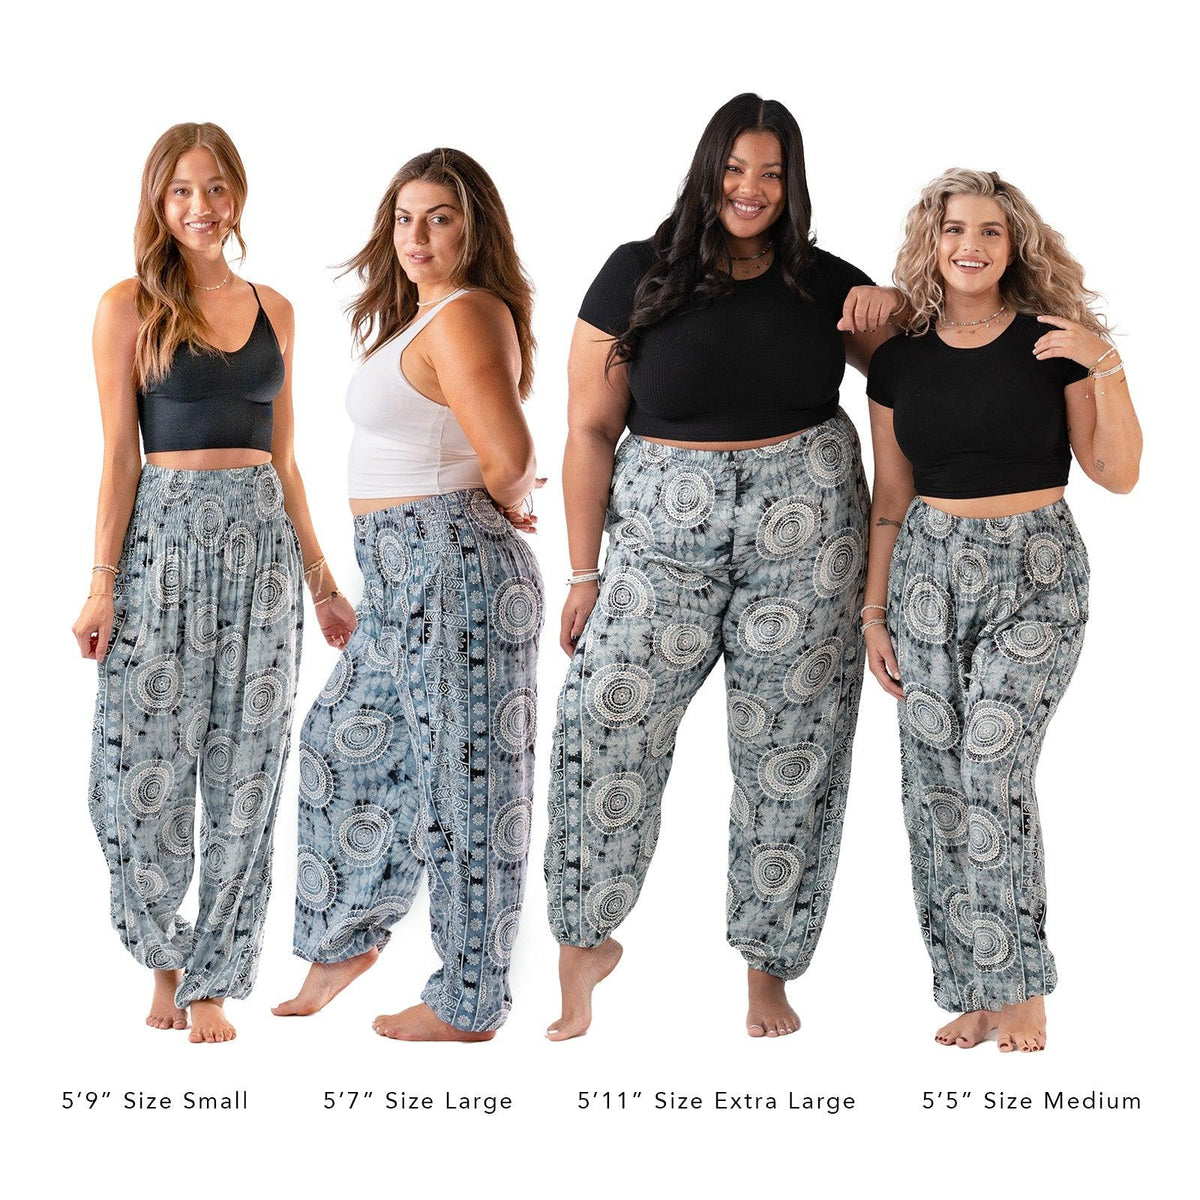 Models of different sizes wearing gray watercolor and white mandala print harem pants. Showcasing the fit of the harem pants of both curve and standard sizes.